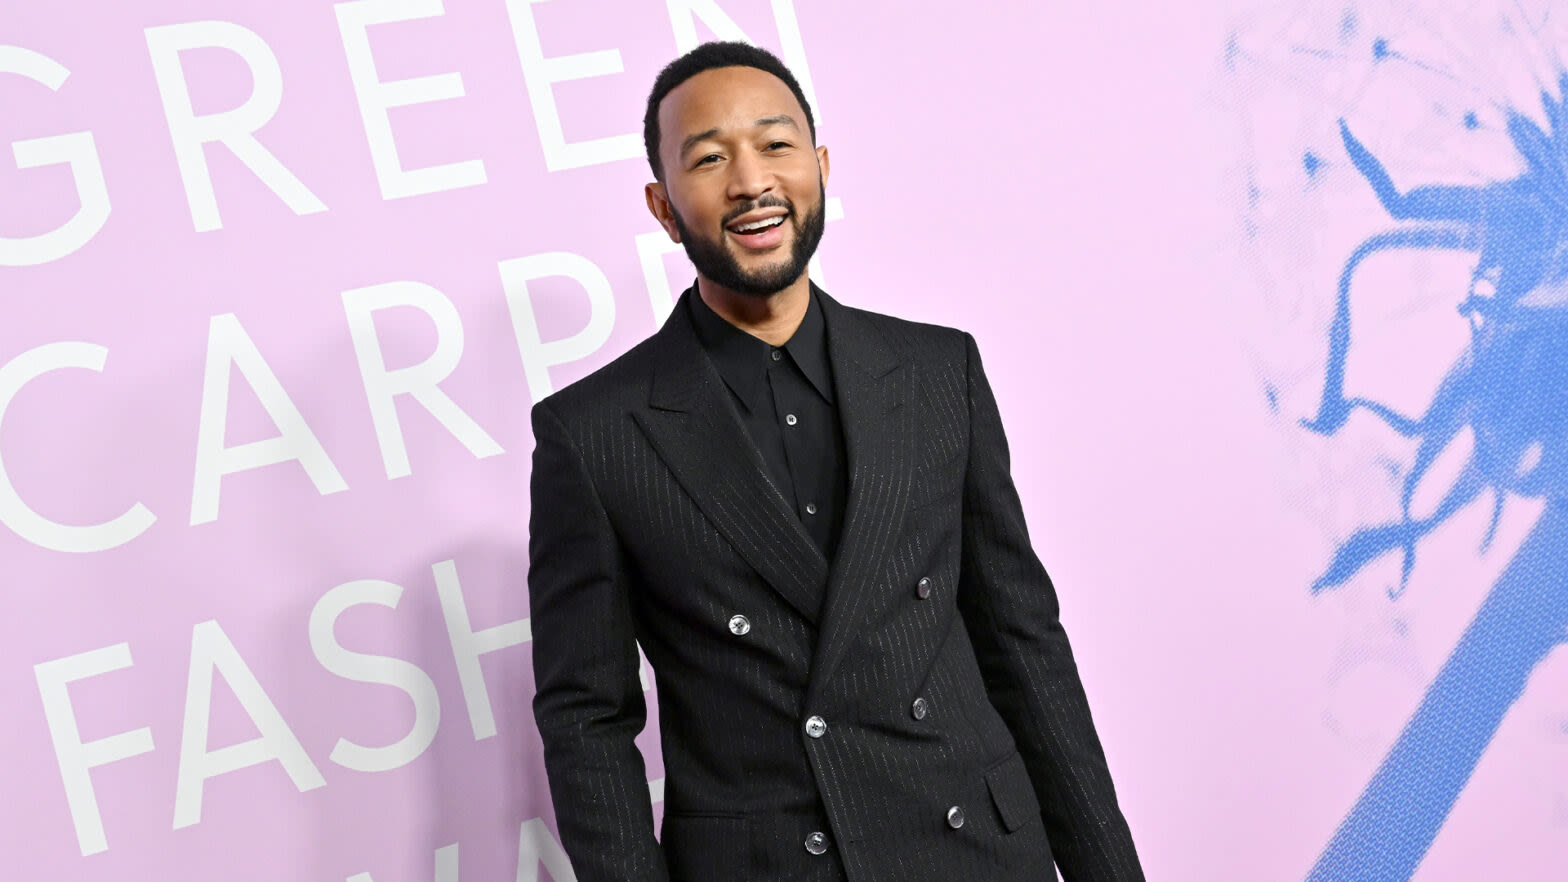 John Legend Teams Up With Box Tops For Education To Introduce An Environmental Science Space For Students ...